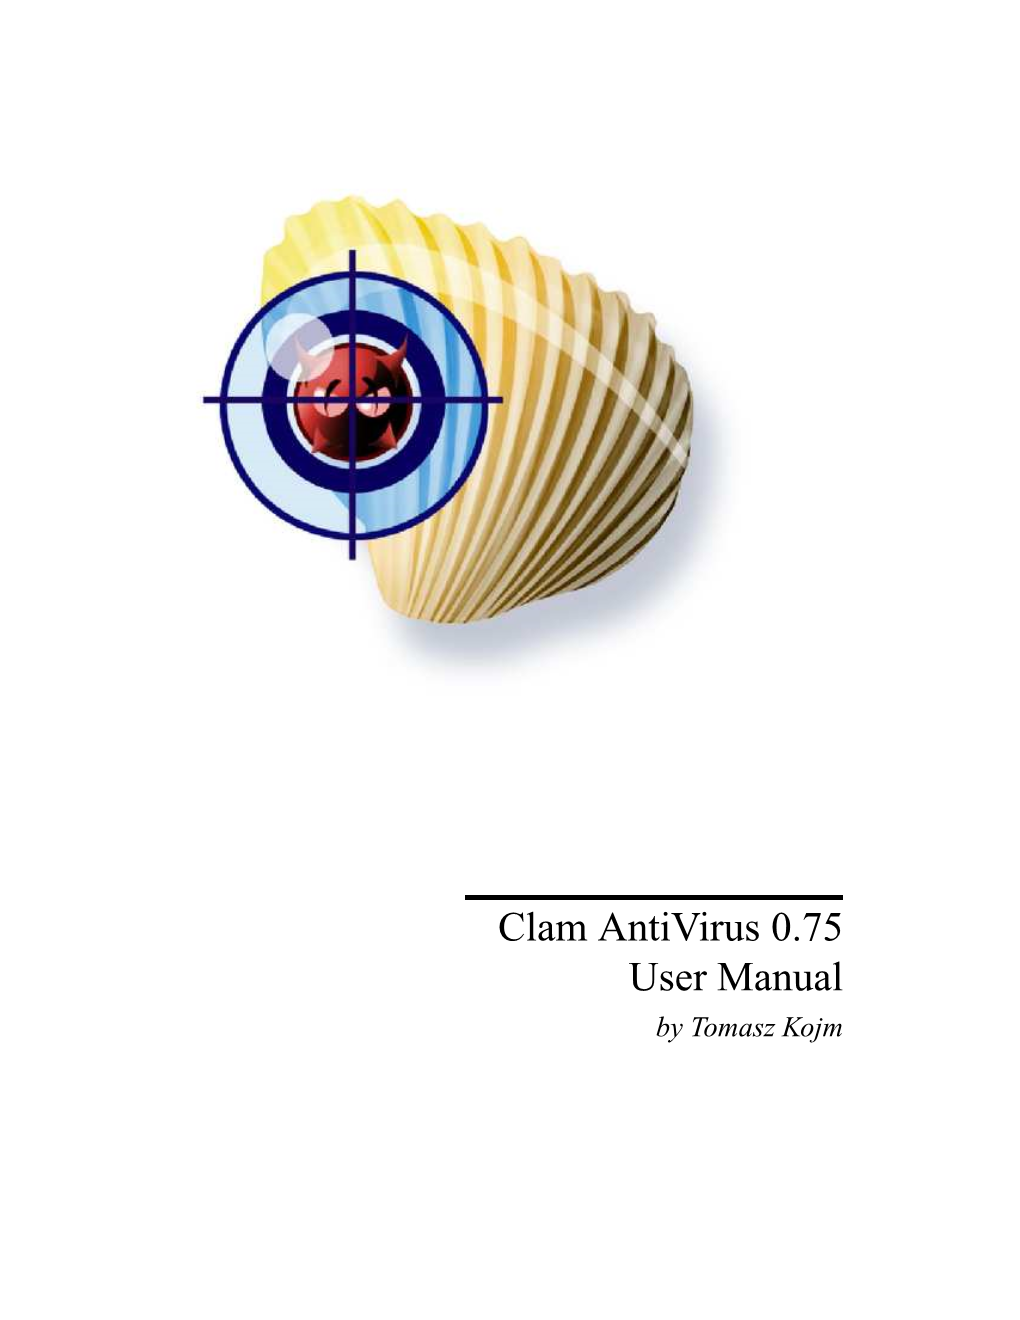 Clam Antivirus 0.75 User Manual by Tomasz Kojm Contents 1